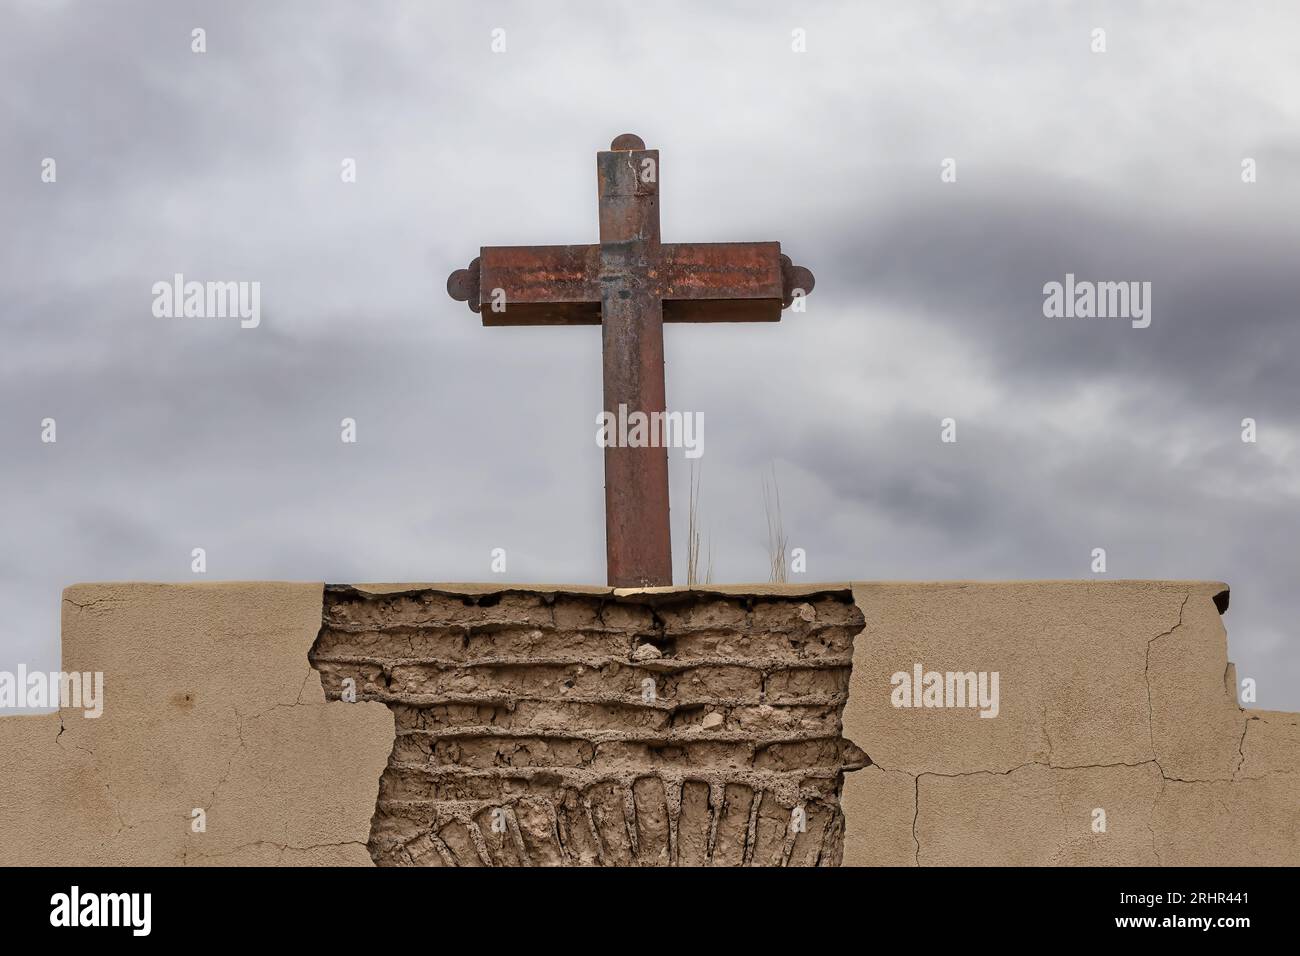 A cross on a deteriorating cemetery gate near El Paso, Texas. Stock Photo